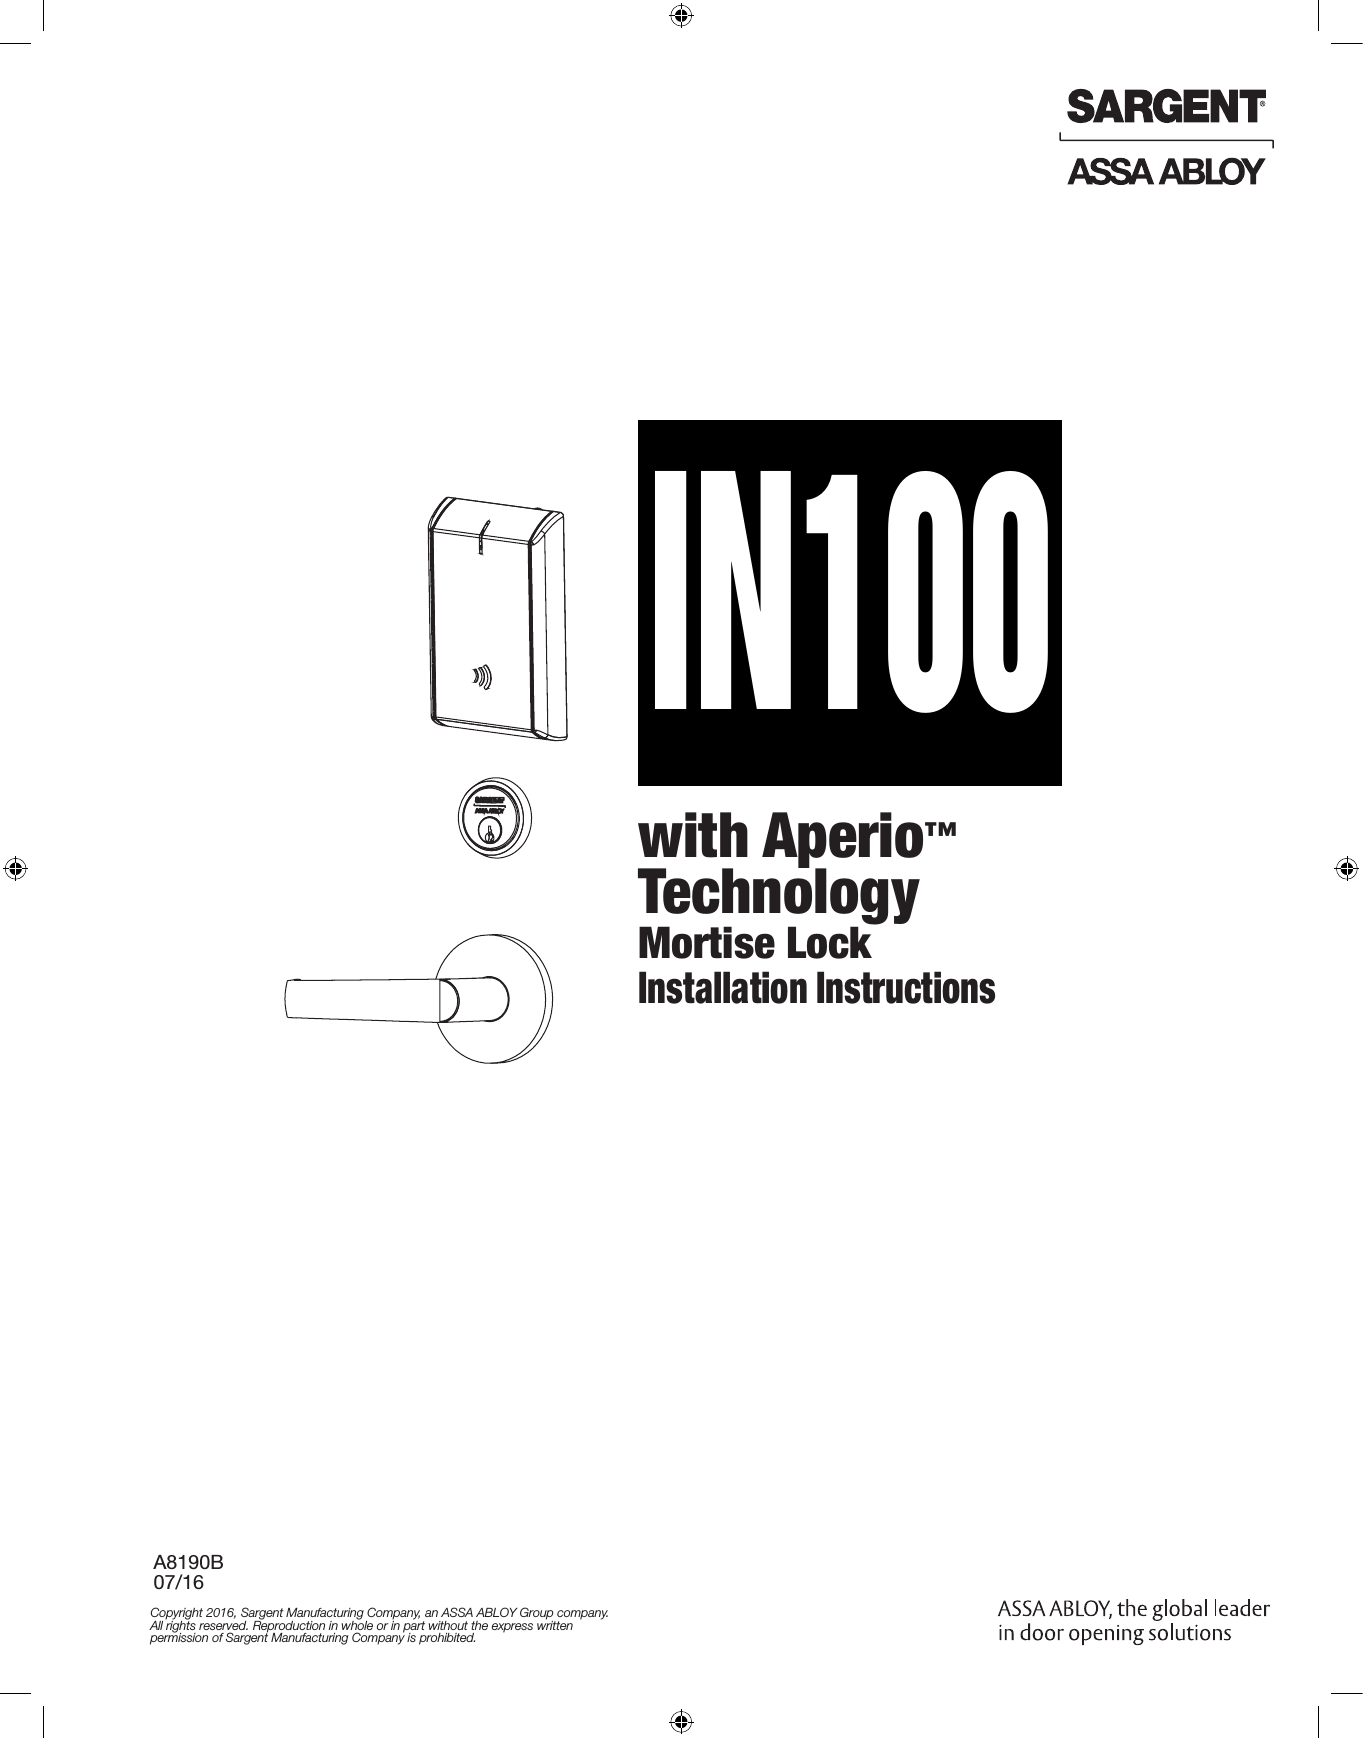 A8190B 07/16Copyright 2016, Sargent Manufacturing Company, an ASSA ABLOY Group company. All rights reserved. Reproduction in whole or in part without the express written  permission of Sargent Manufacturing Company is prohibited. with Aperio™  TechnologyMortise LockInstallation InstructionsIN100